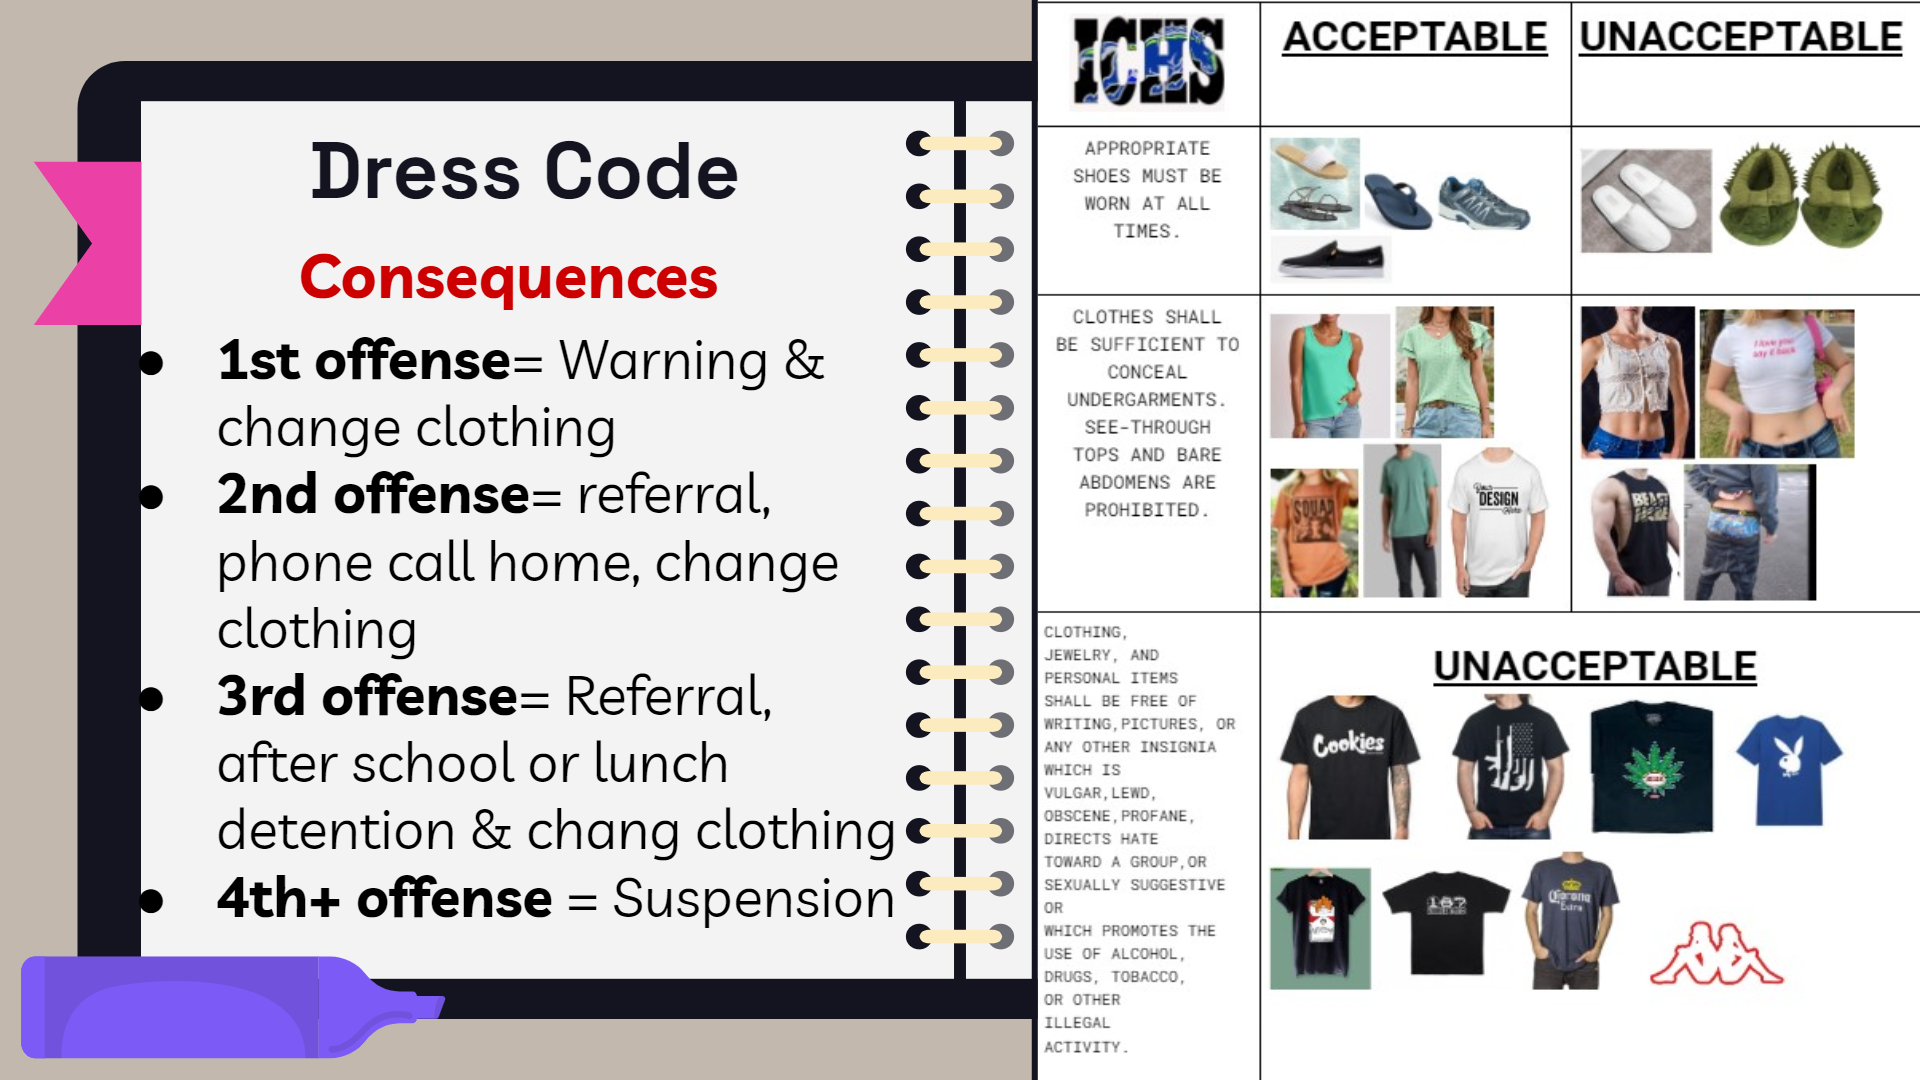 dress code policy 